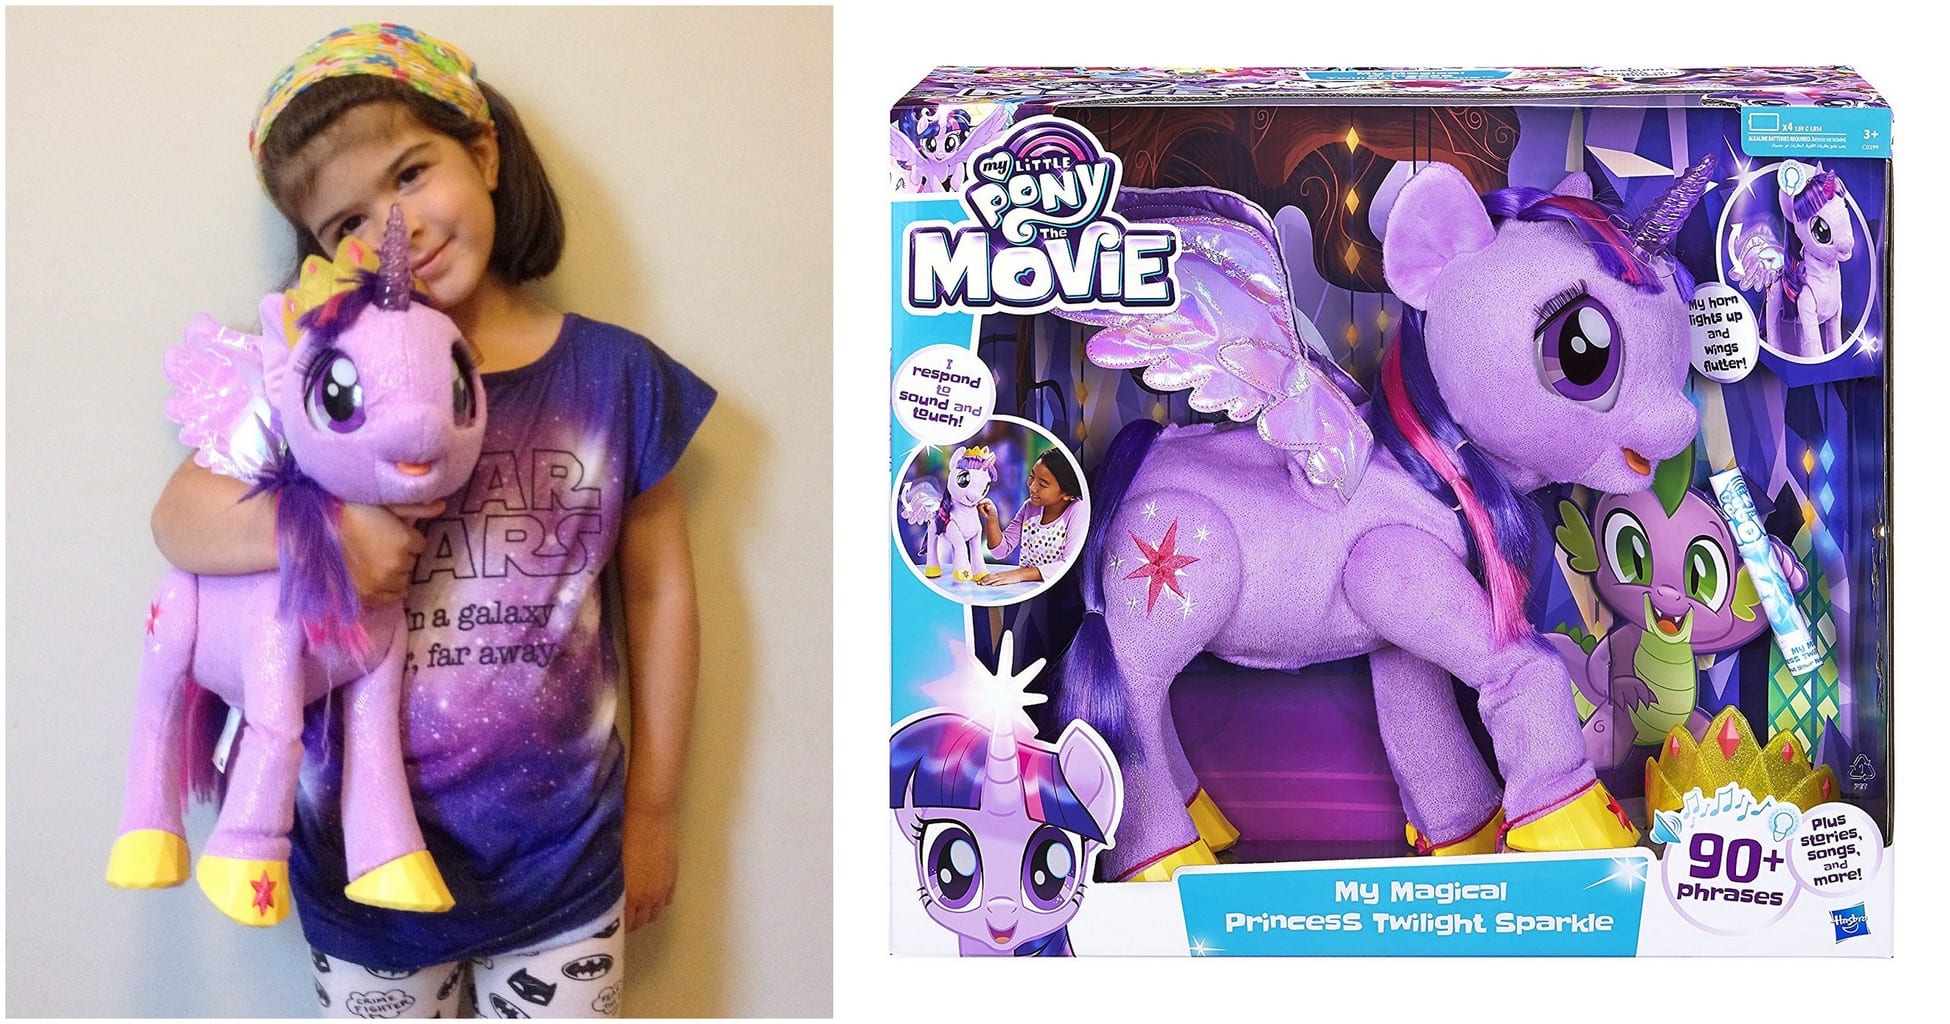 My Magical Princess Twilight Sparkle toy (from My Little Pony The